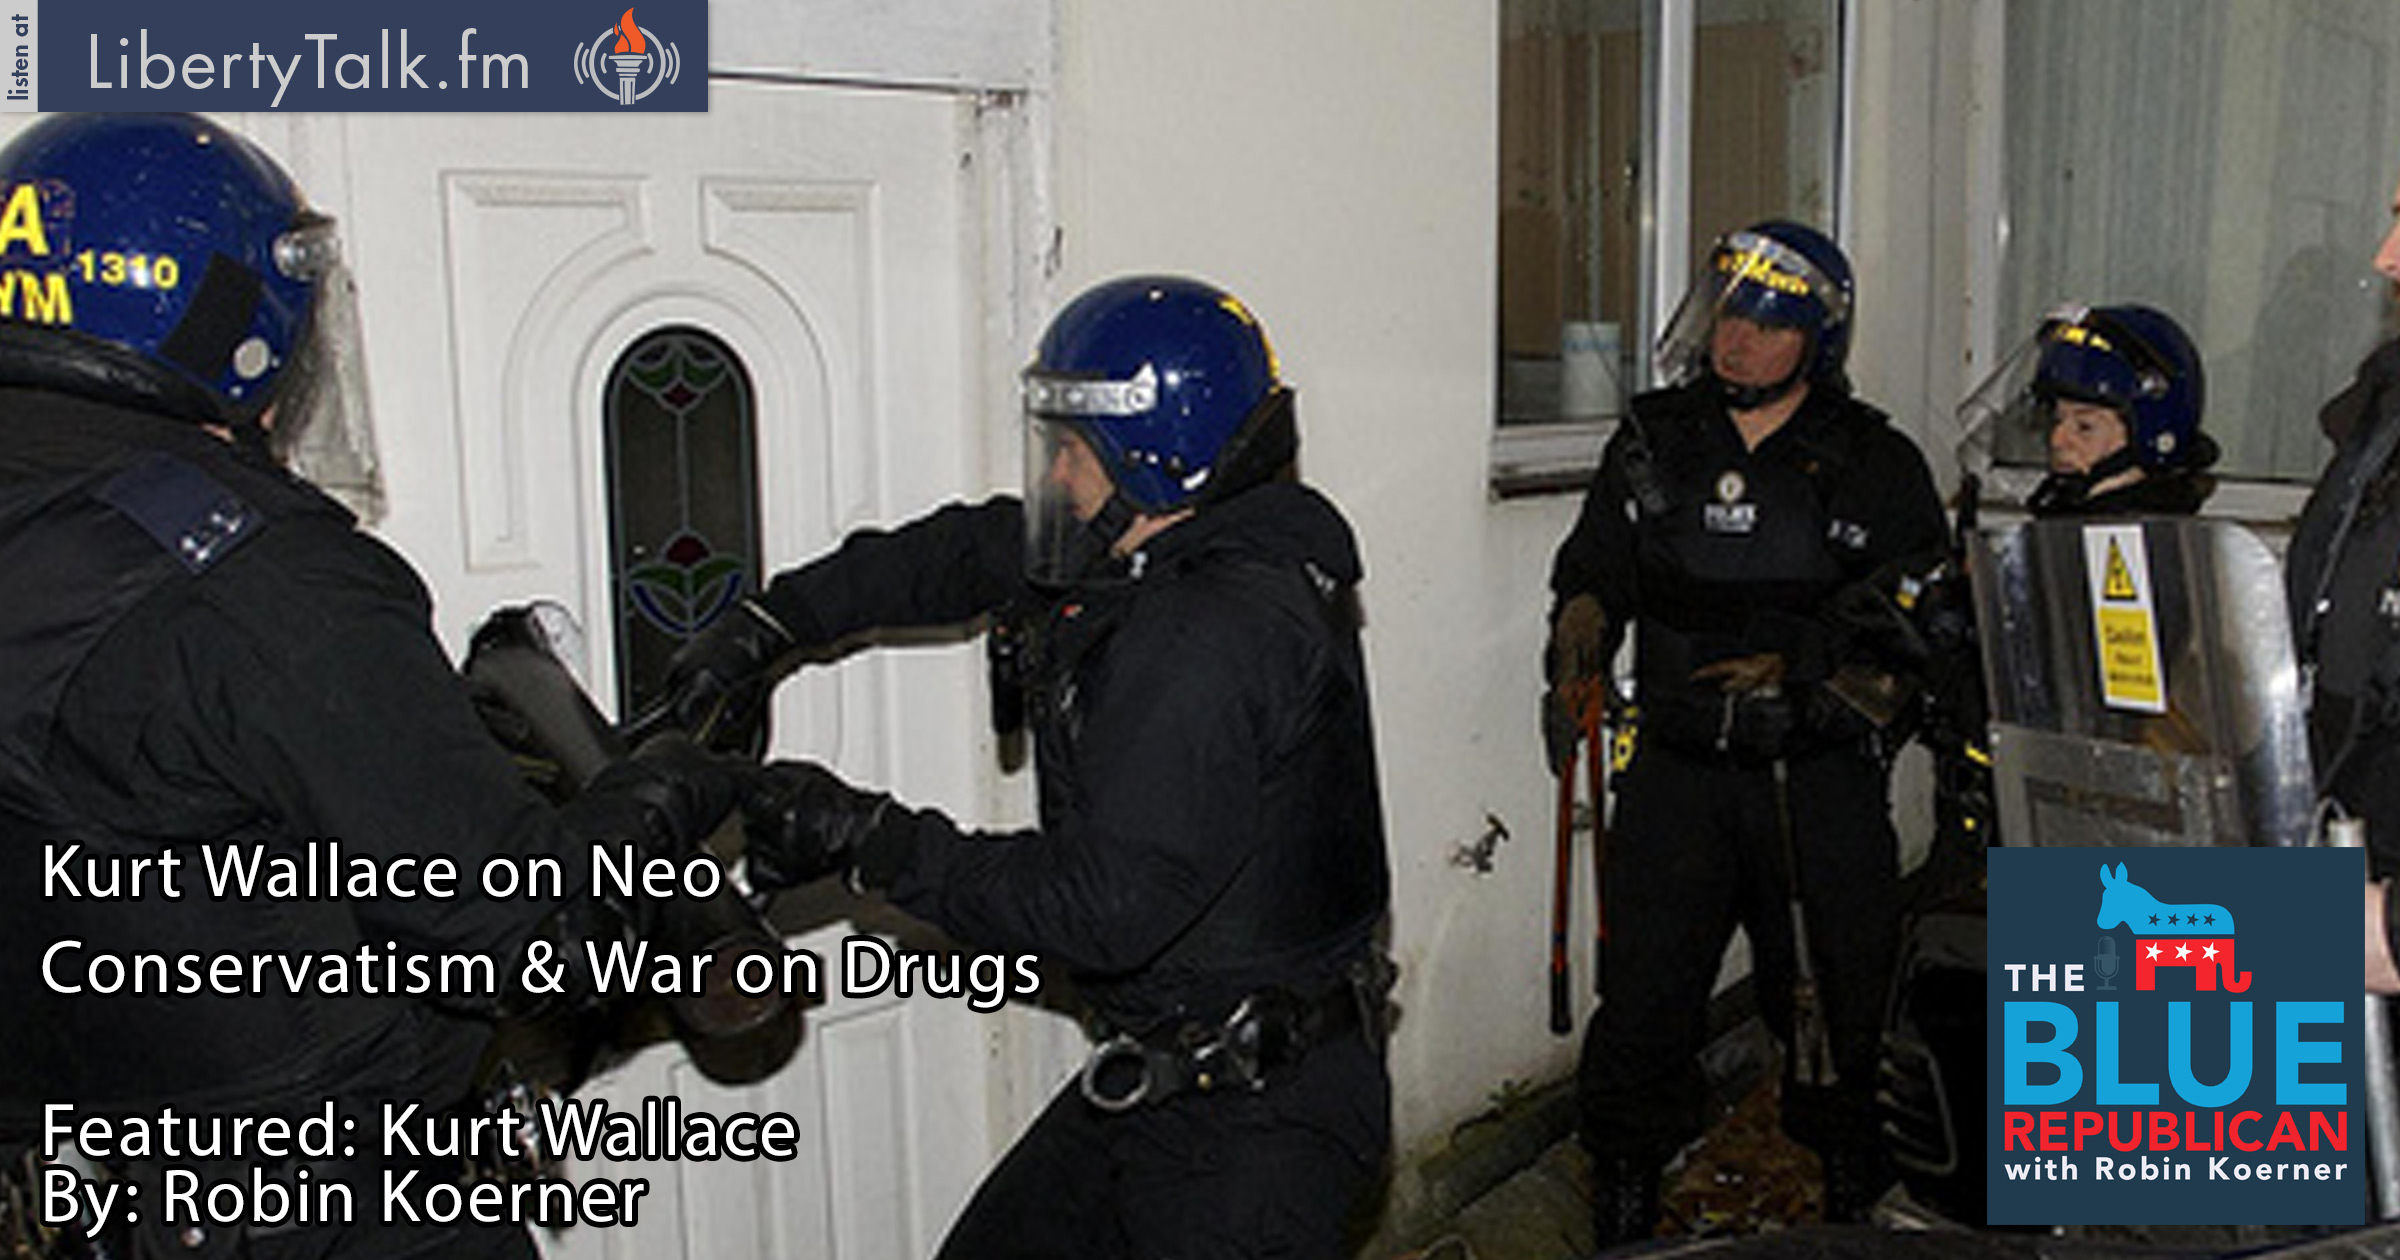 Kurt Wallace speaks about Neo Conservatism and the war on drugs